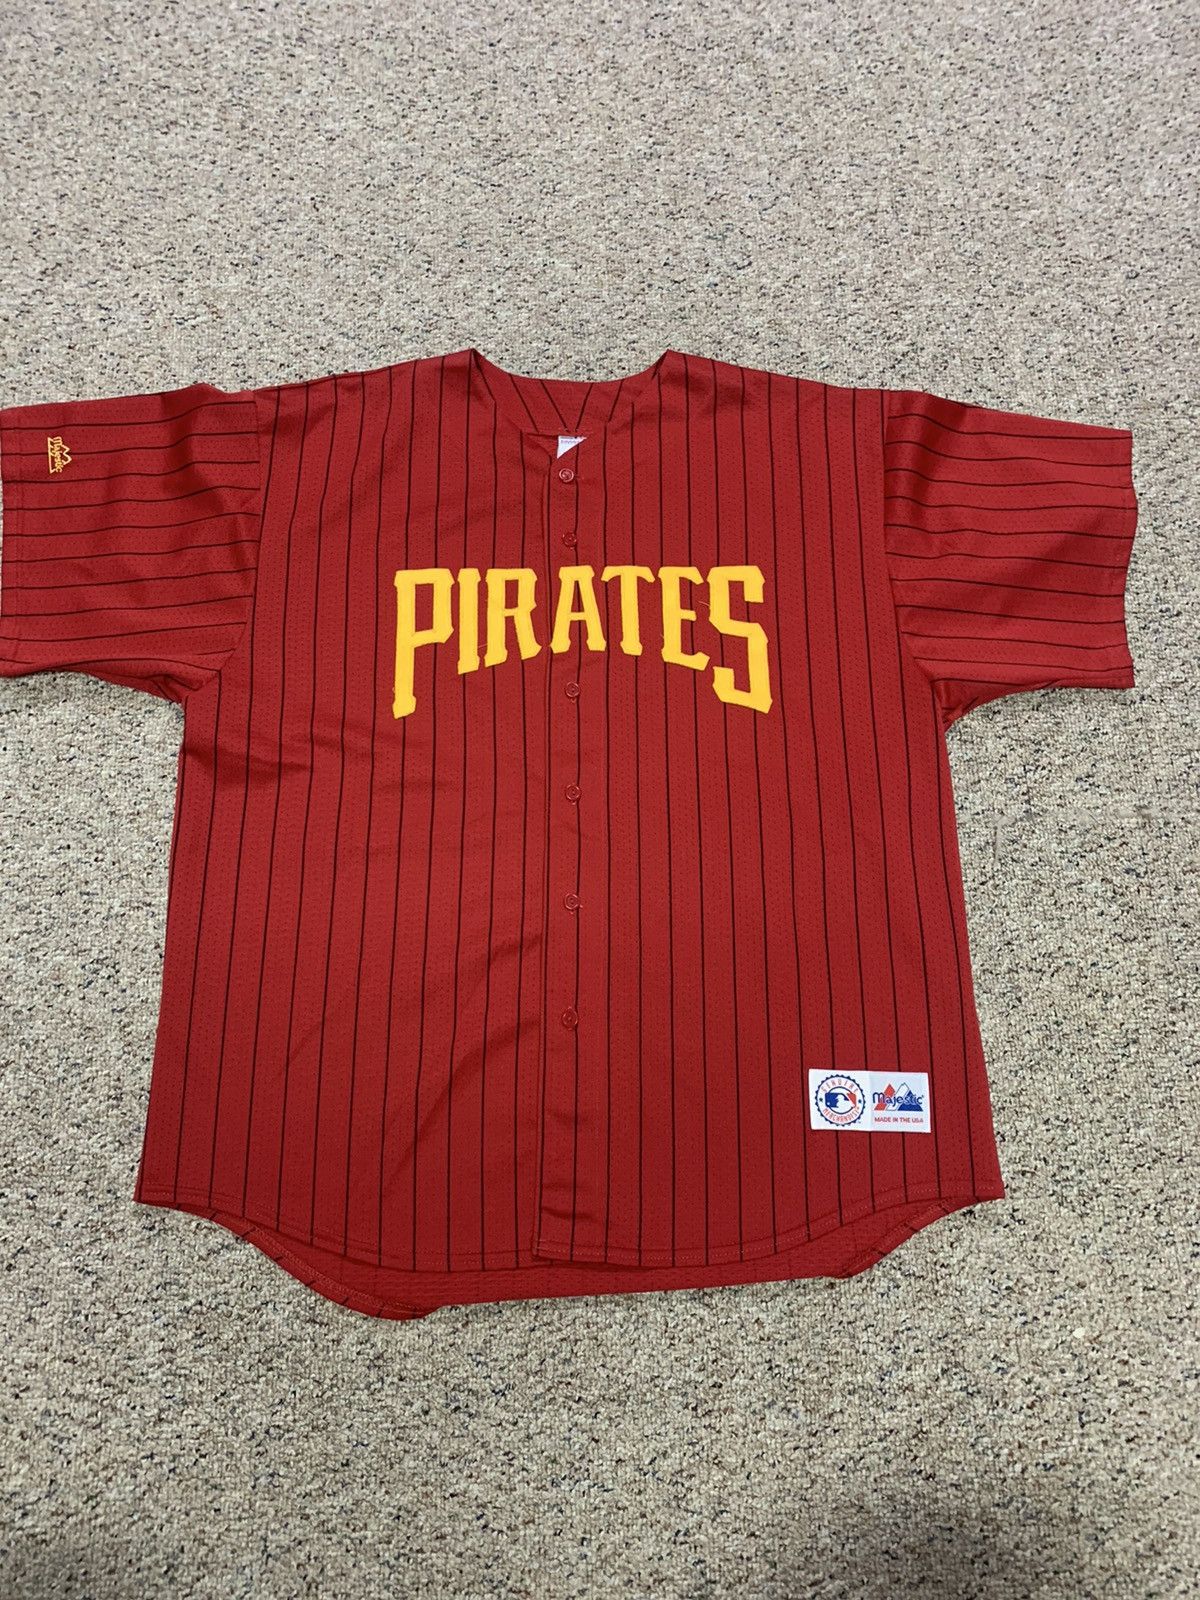 Pittsburgh Pirates One Piece Baseball Jersey Red - Scesy